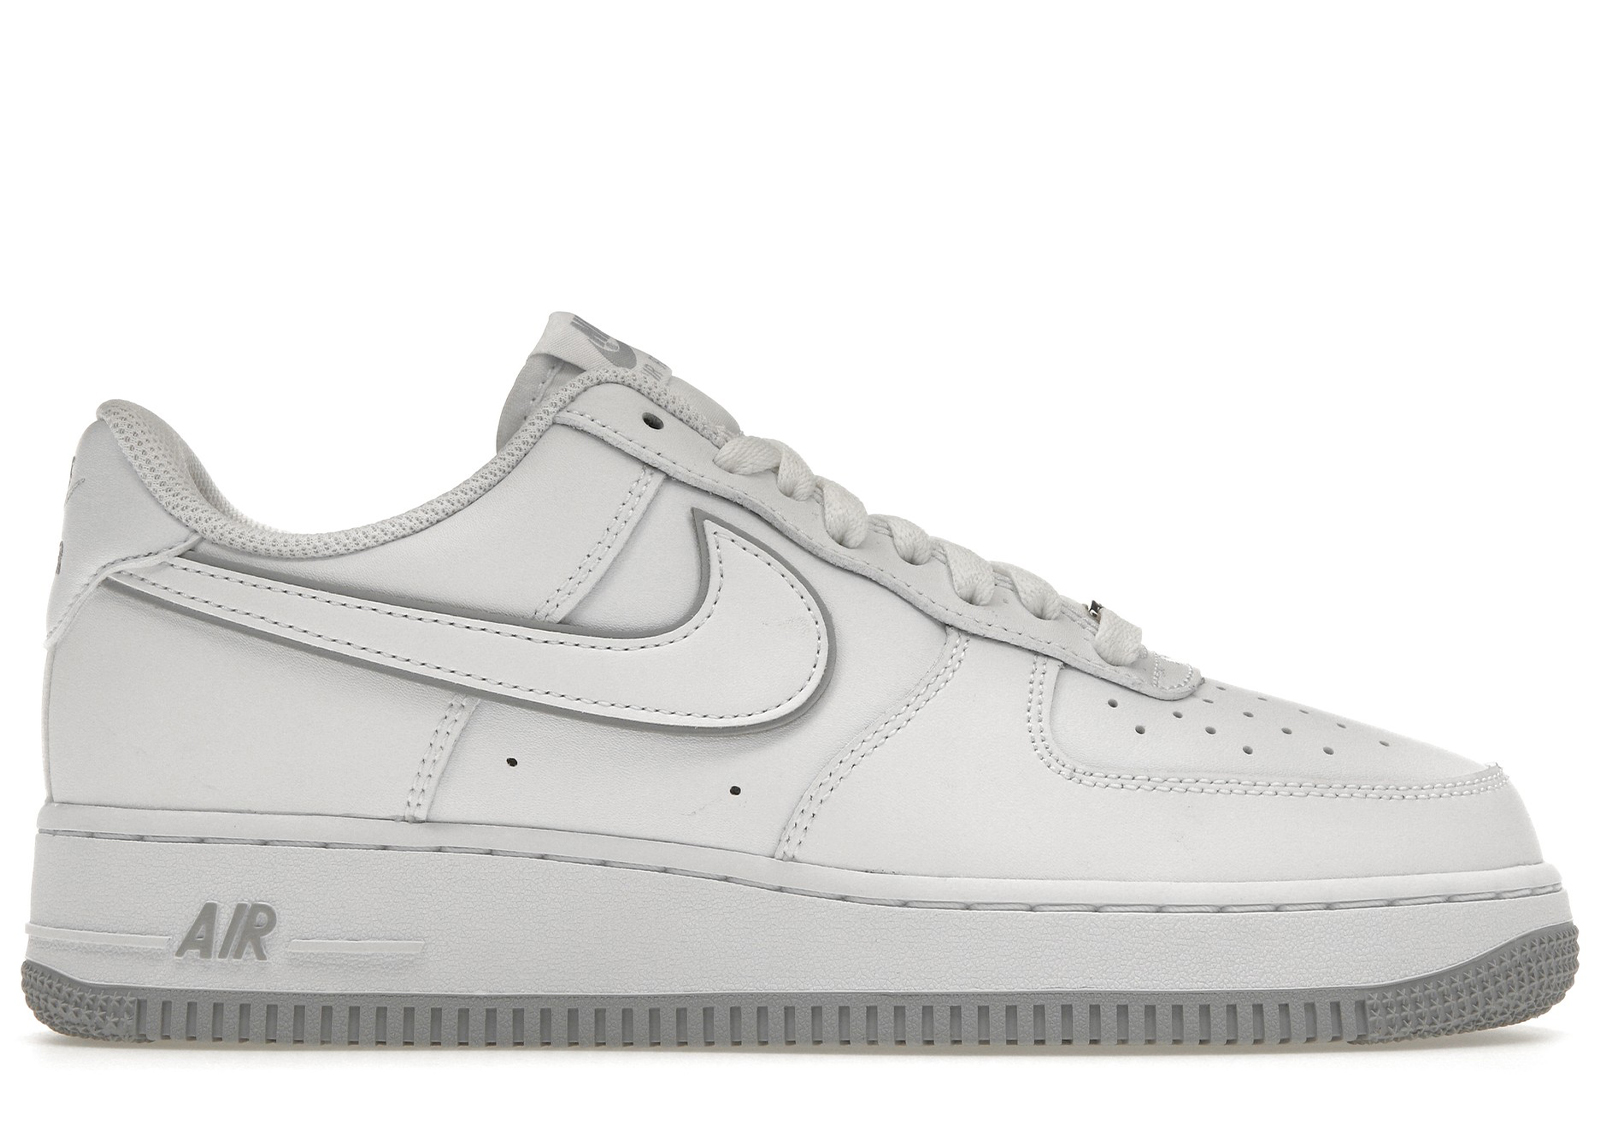 Nike Air Force 1 '07 Low White Wolf Grey Sole